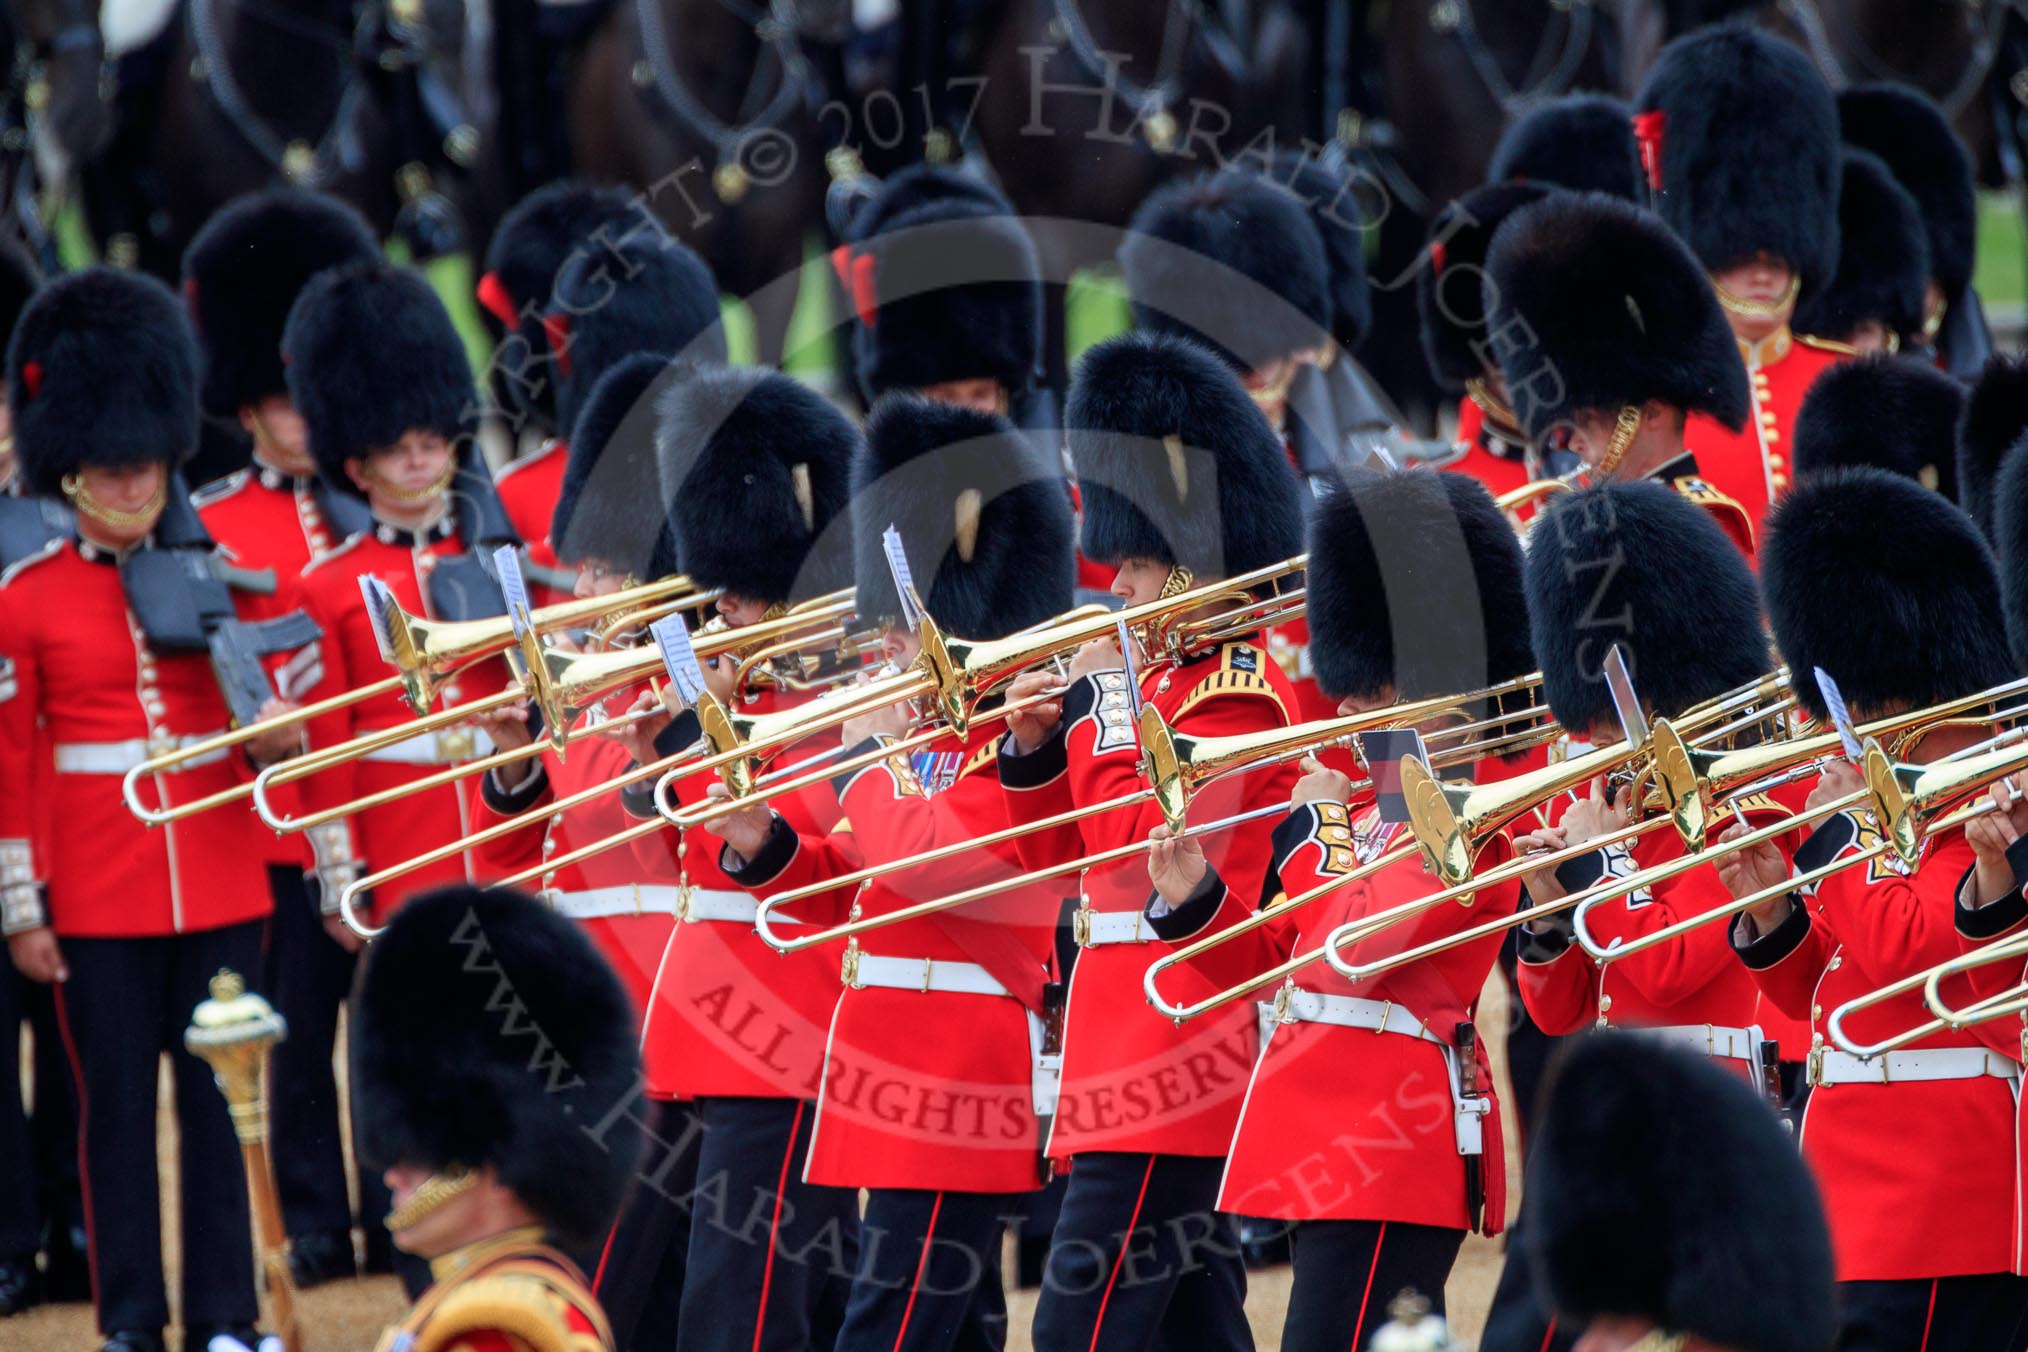 during The Colonel's Review {iptcyear4} (final rehearsal for Trooping the Colour, The Queen's Birthday Parade)  at Horse Guards Parade, Westminster, London, 2 June 2018, 11:23.